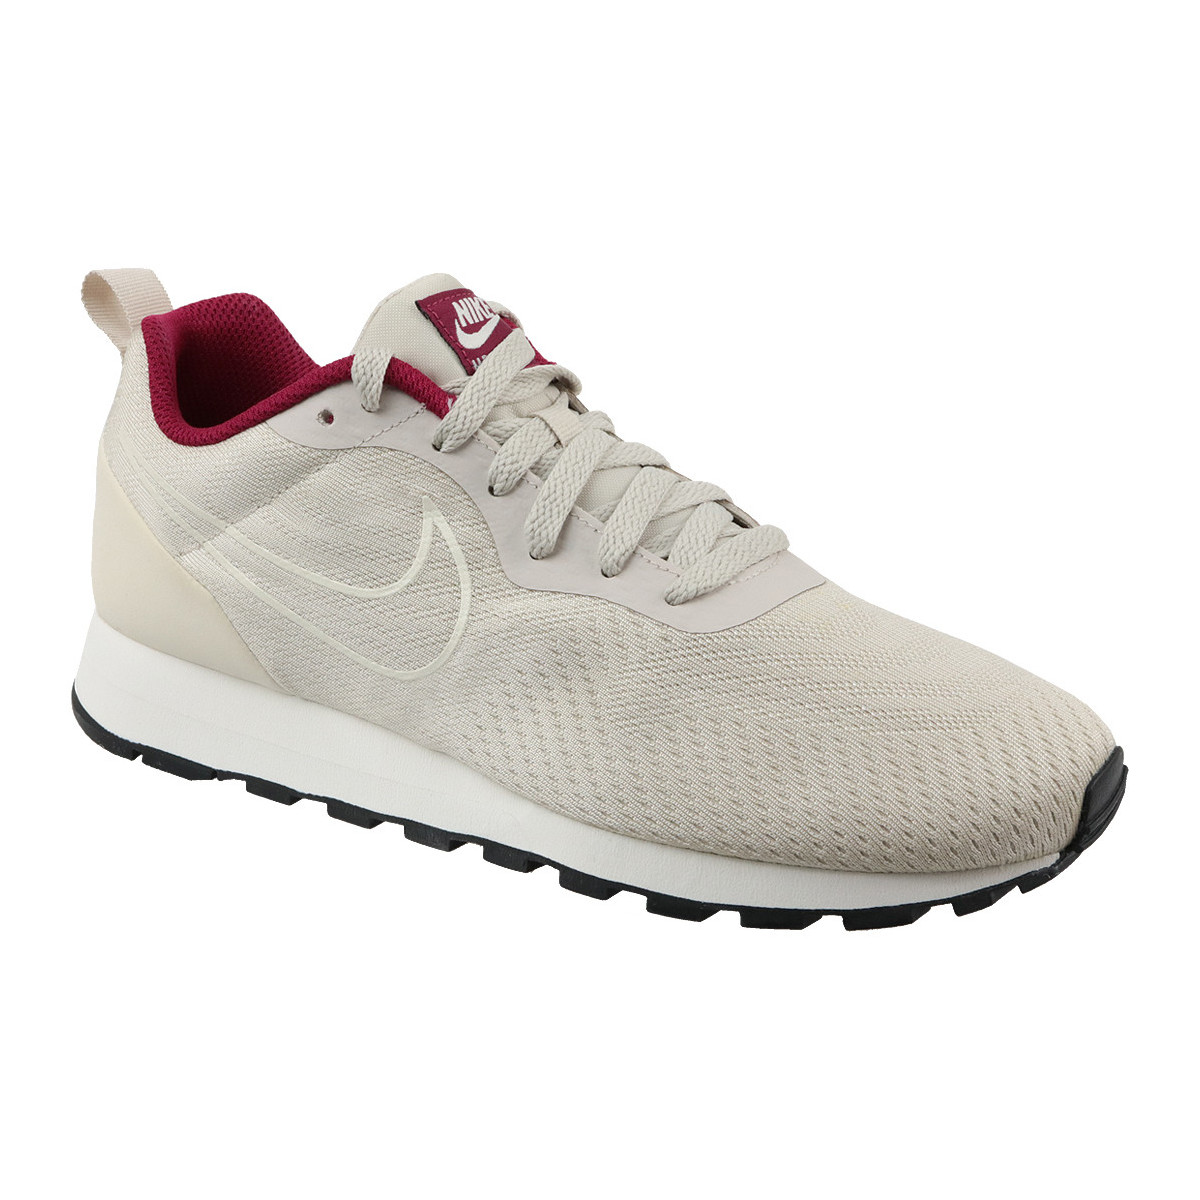 Xαμηλά Sneakers Nike Md Runner 2 Eng Mesh Wmns